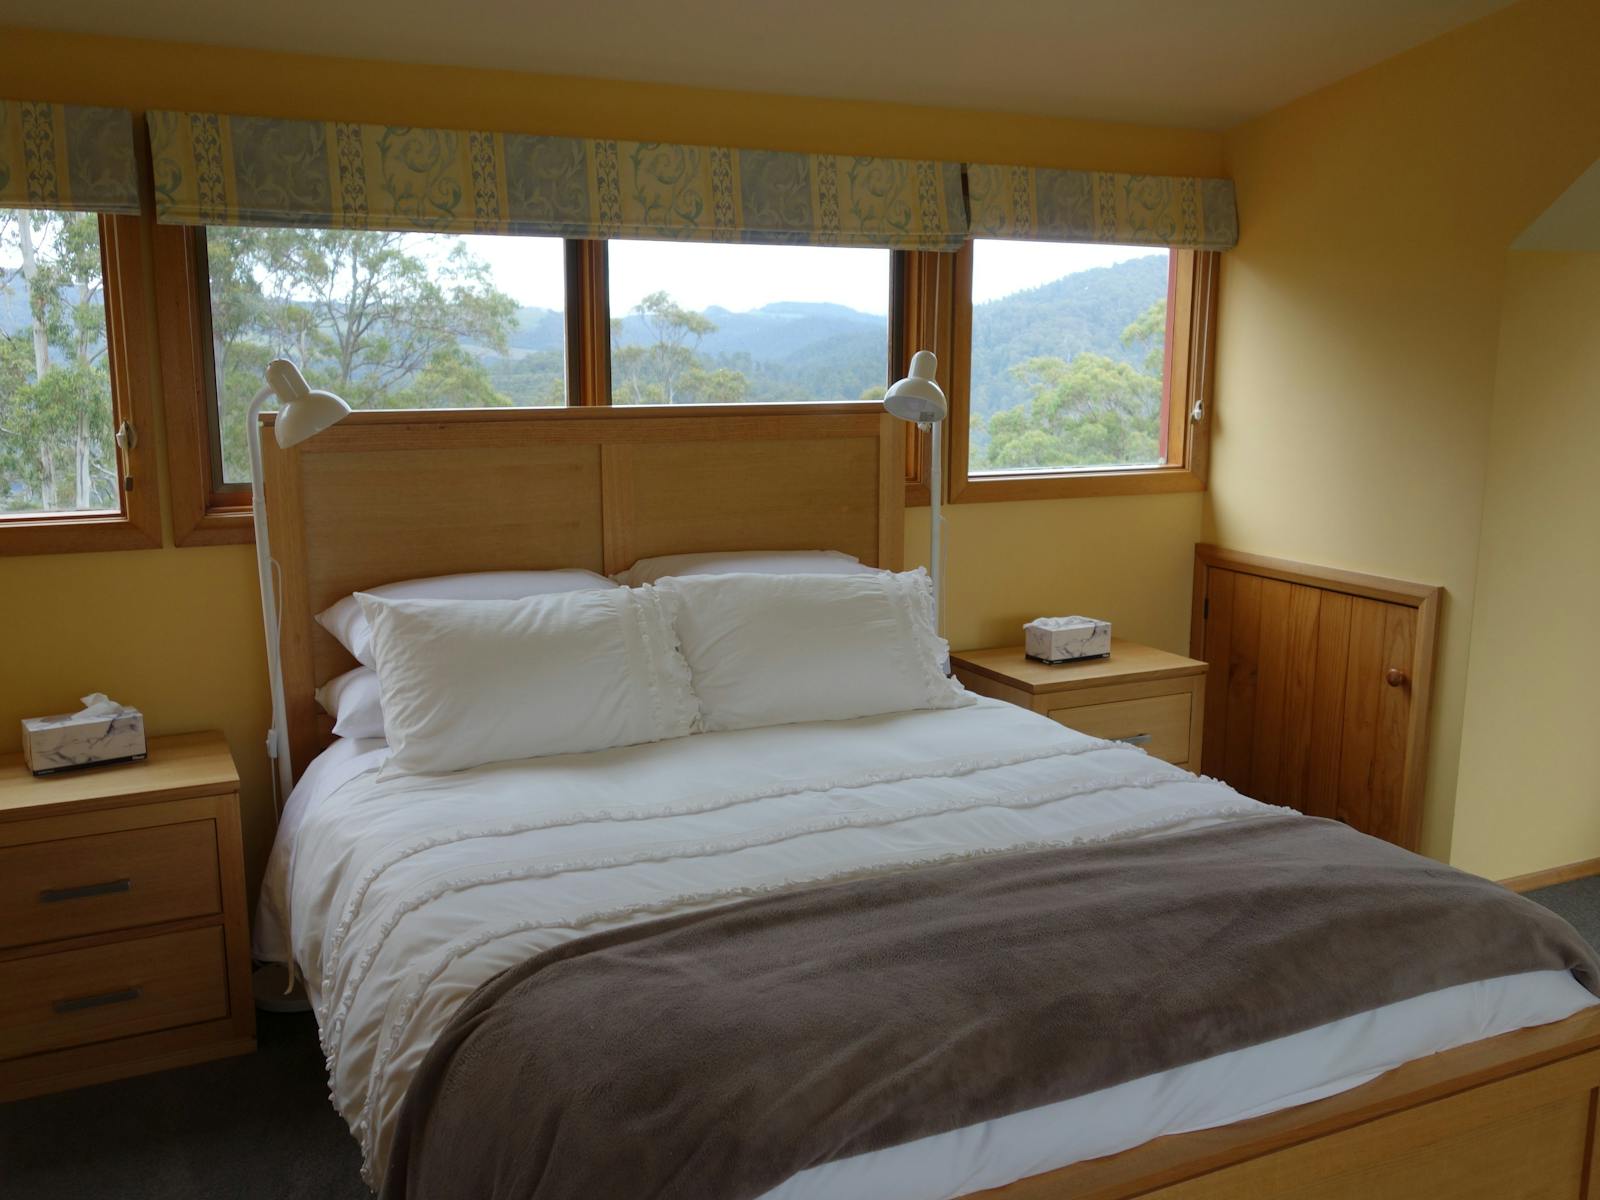 This is one of three double bedrooms, all with spectacular views. These rooms are light and warm.